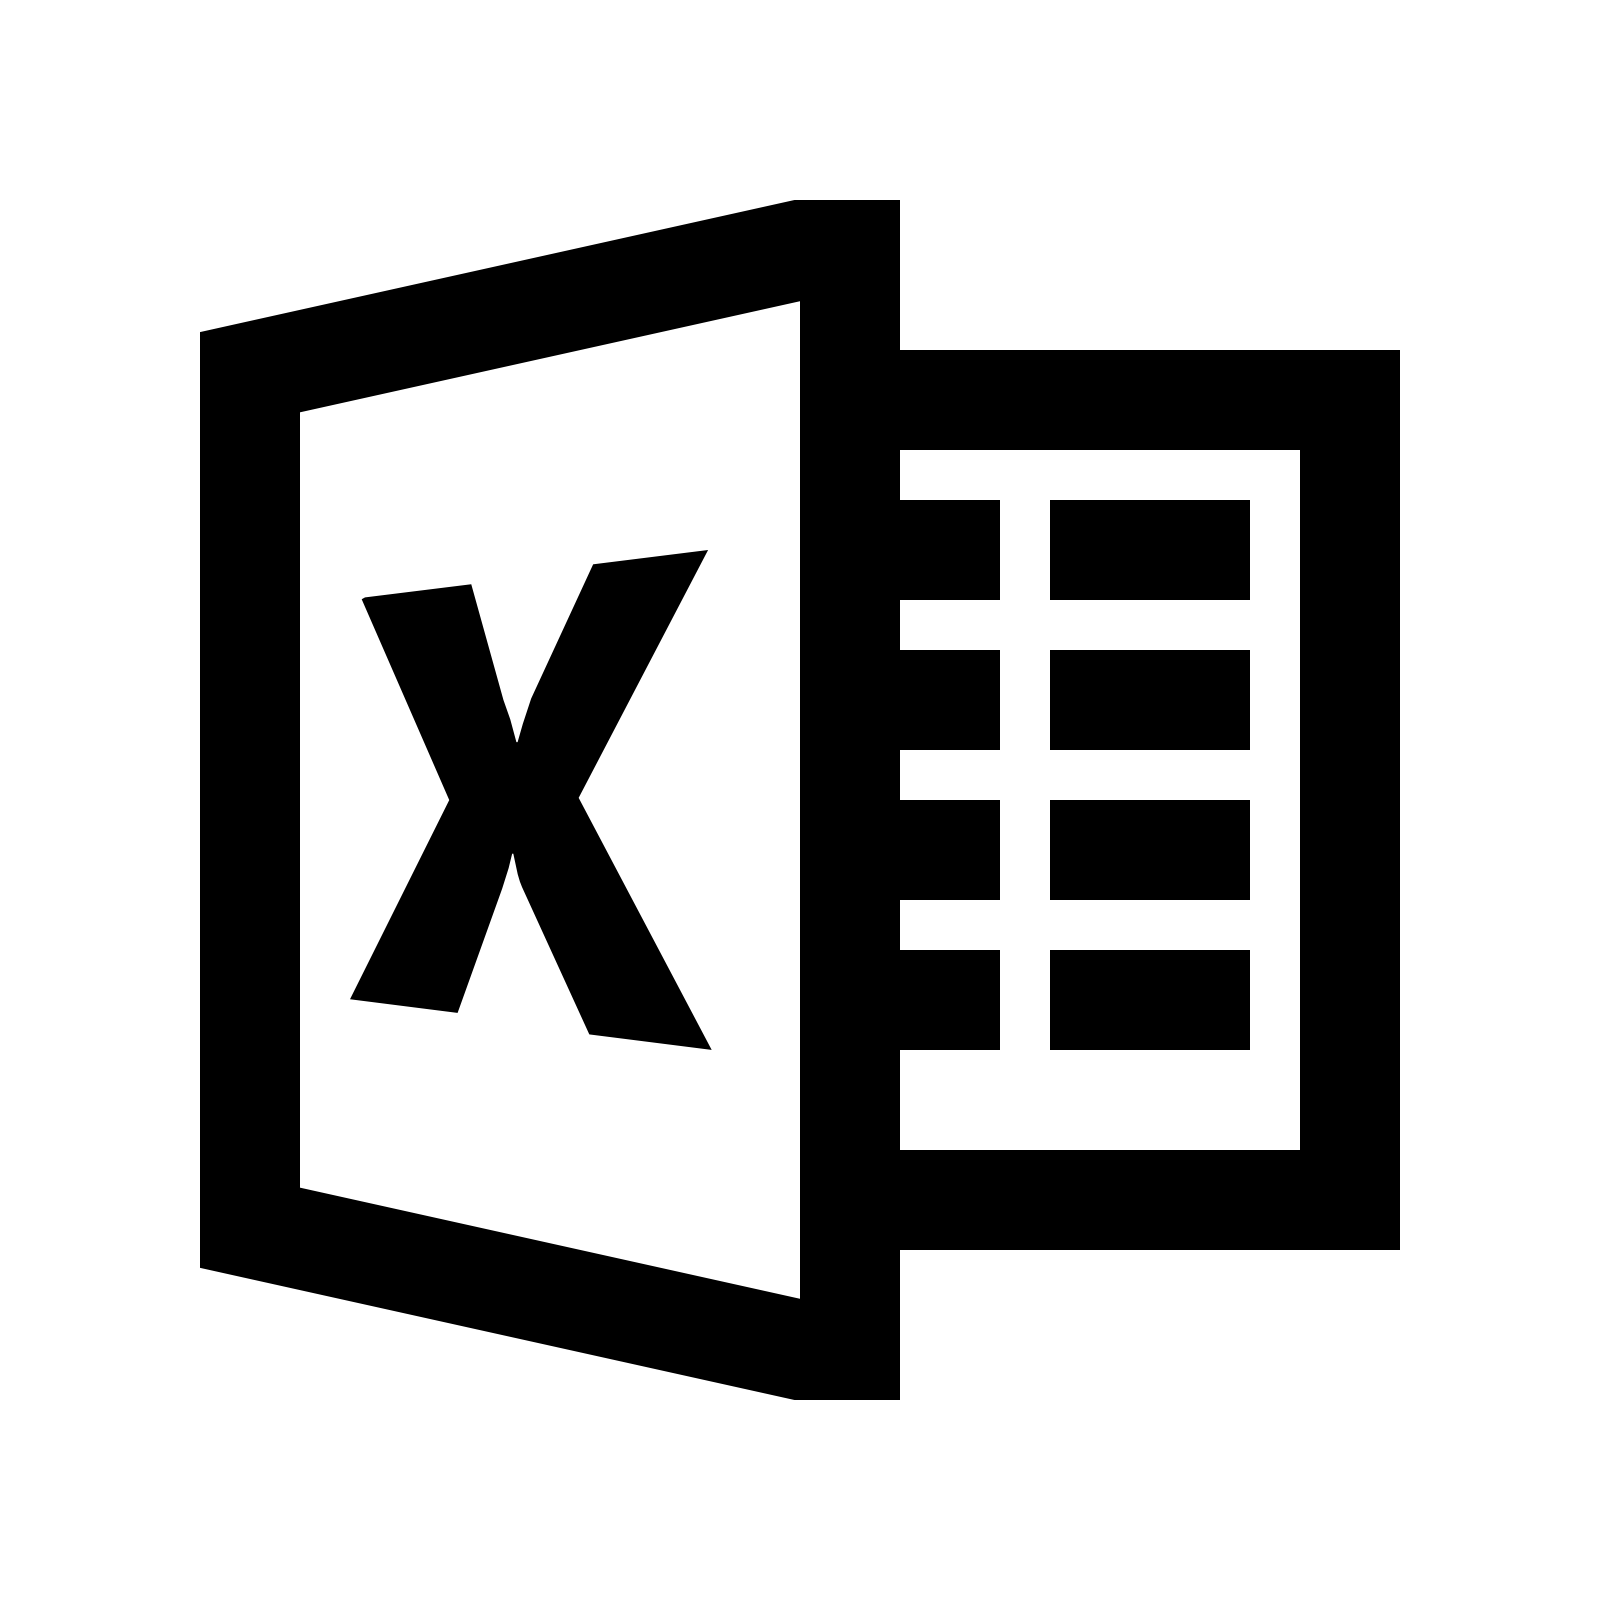 Microsoft Excel 2013 Introduction Quick Reference Guide (Cheat Sheet Of Instructions, Tips ...